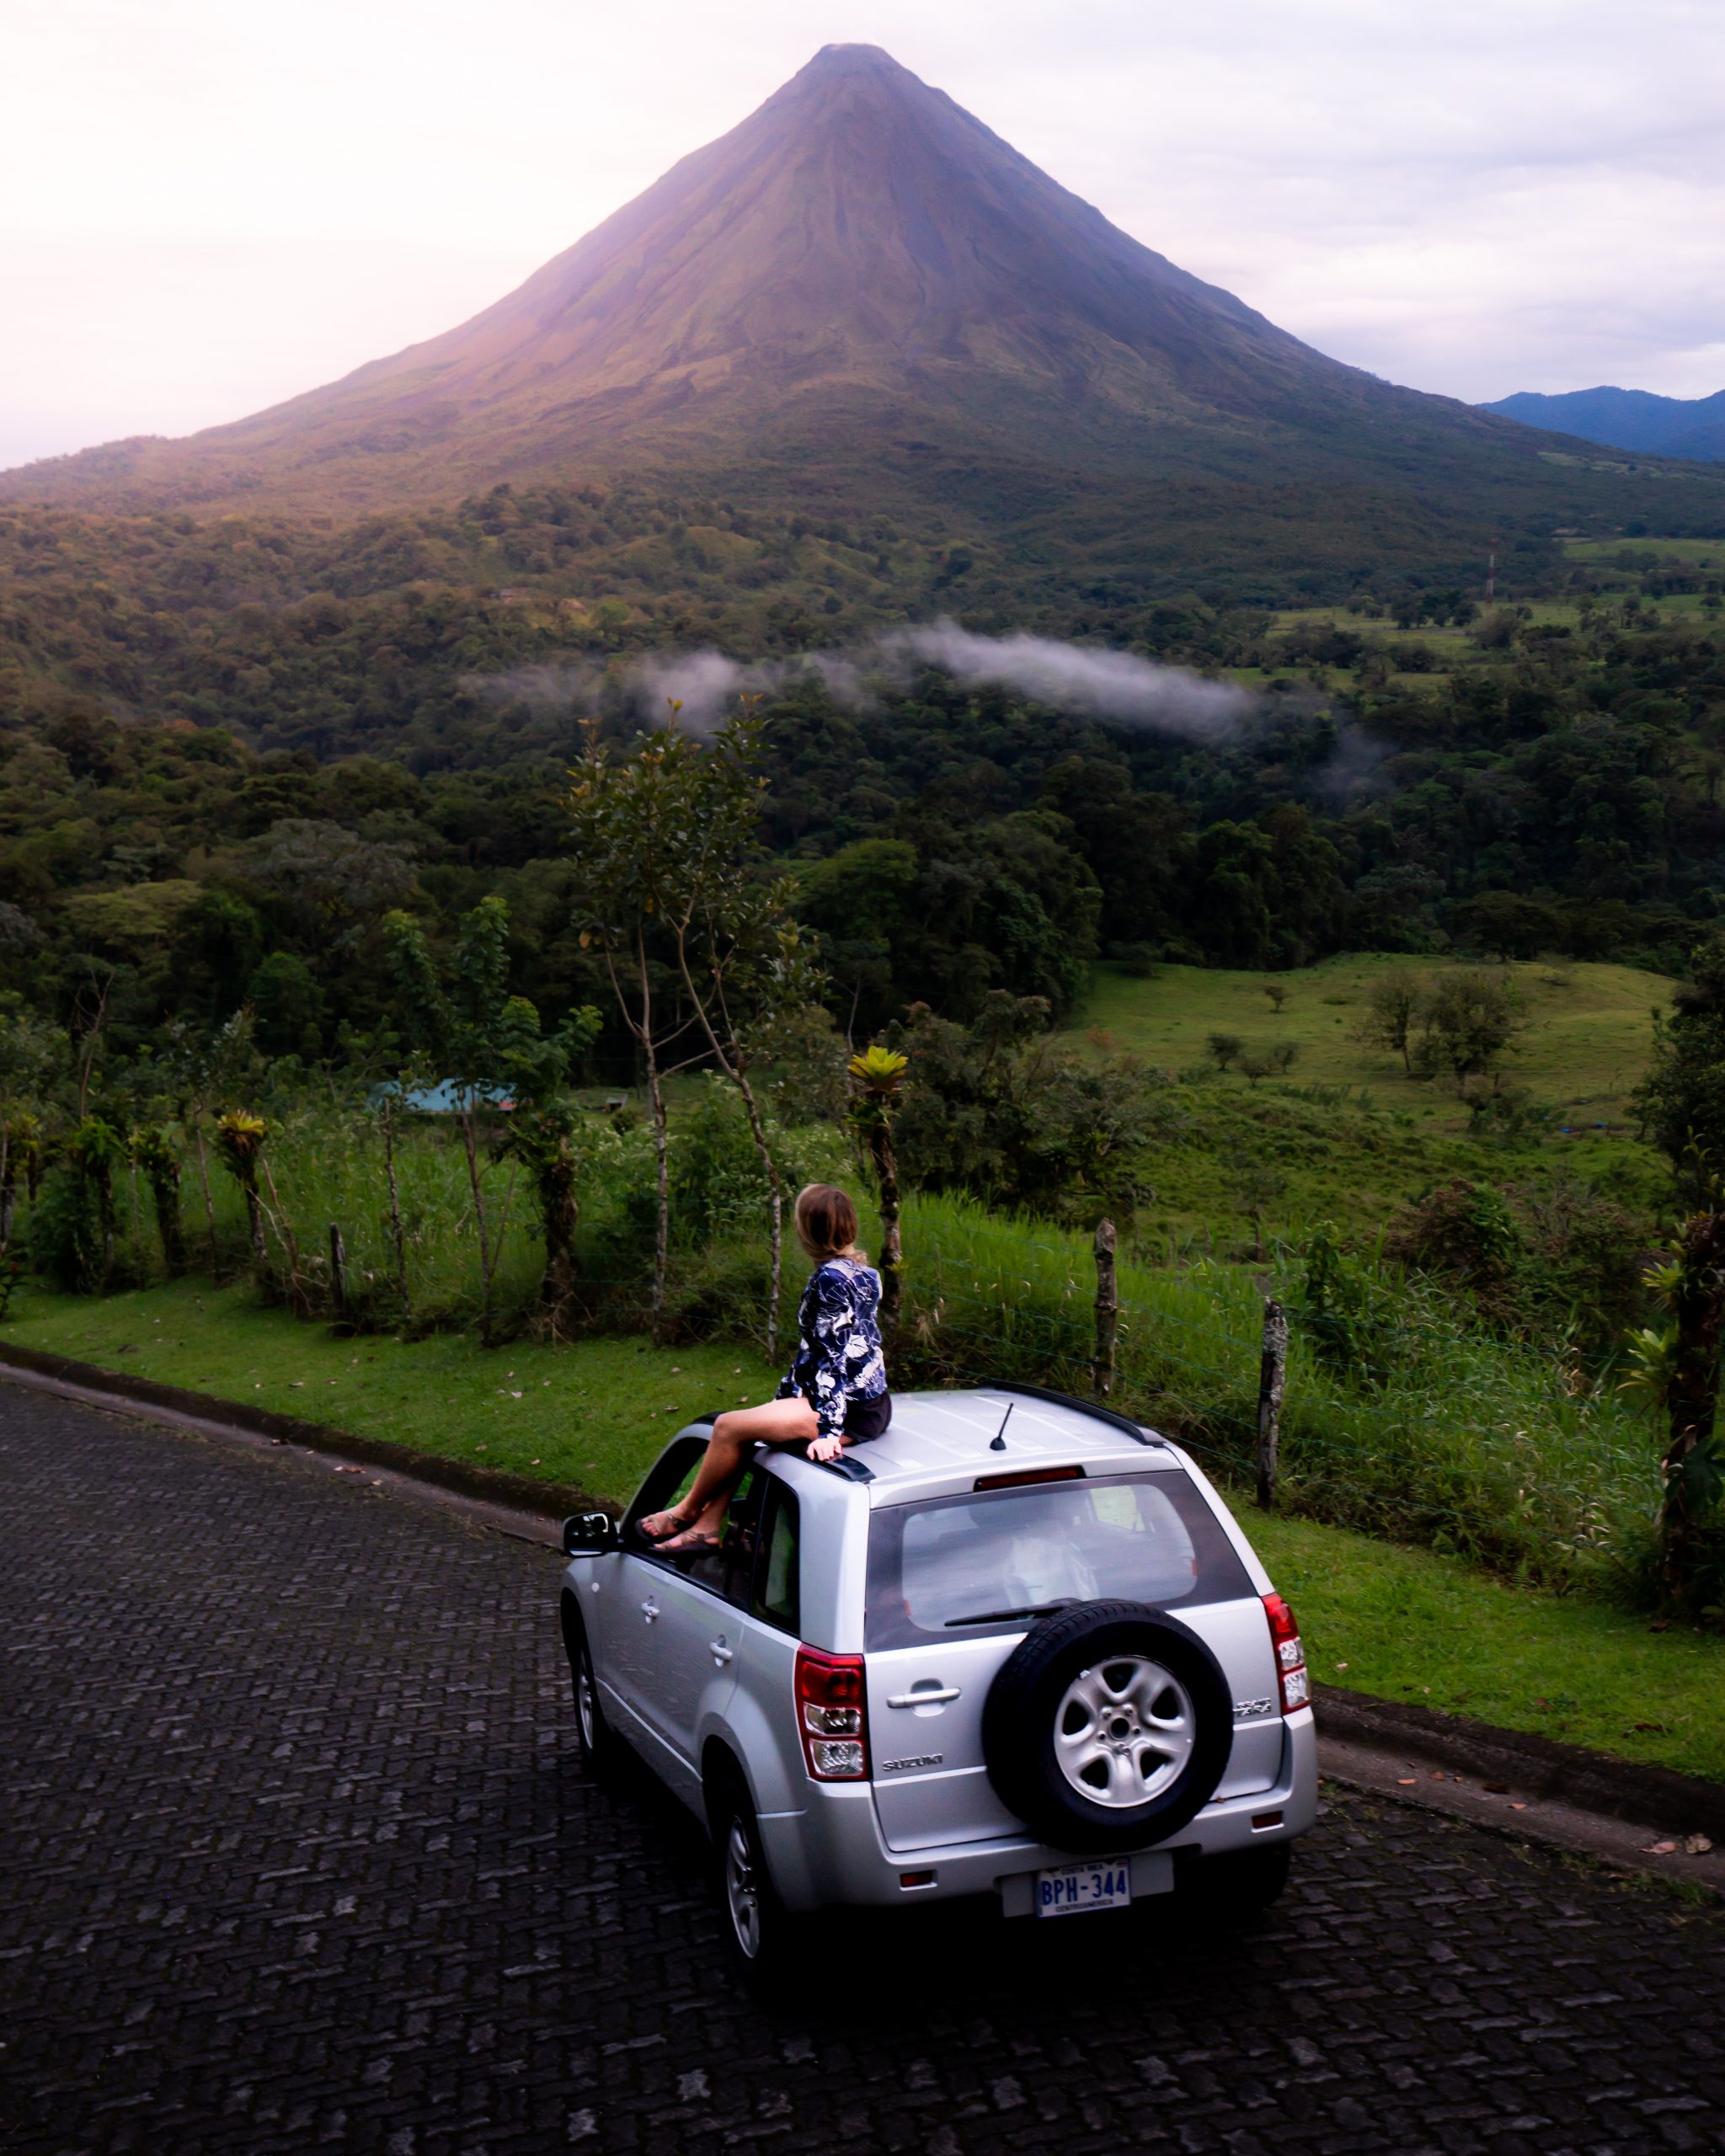 How To Get From Puerto Viejo to La Fortuna - All Possible Ways, cheapest way from Puerto Viejo to La Fortuna, Puerto Viejo to La Fortuna, Puerto Viejo costa rica to La Fortuna, Puerto Viejo to La Fortuna bus, Puerto Viejo to La Fortuna costa rica